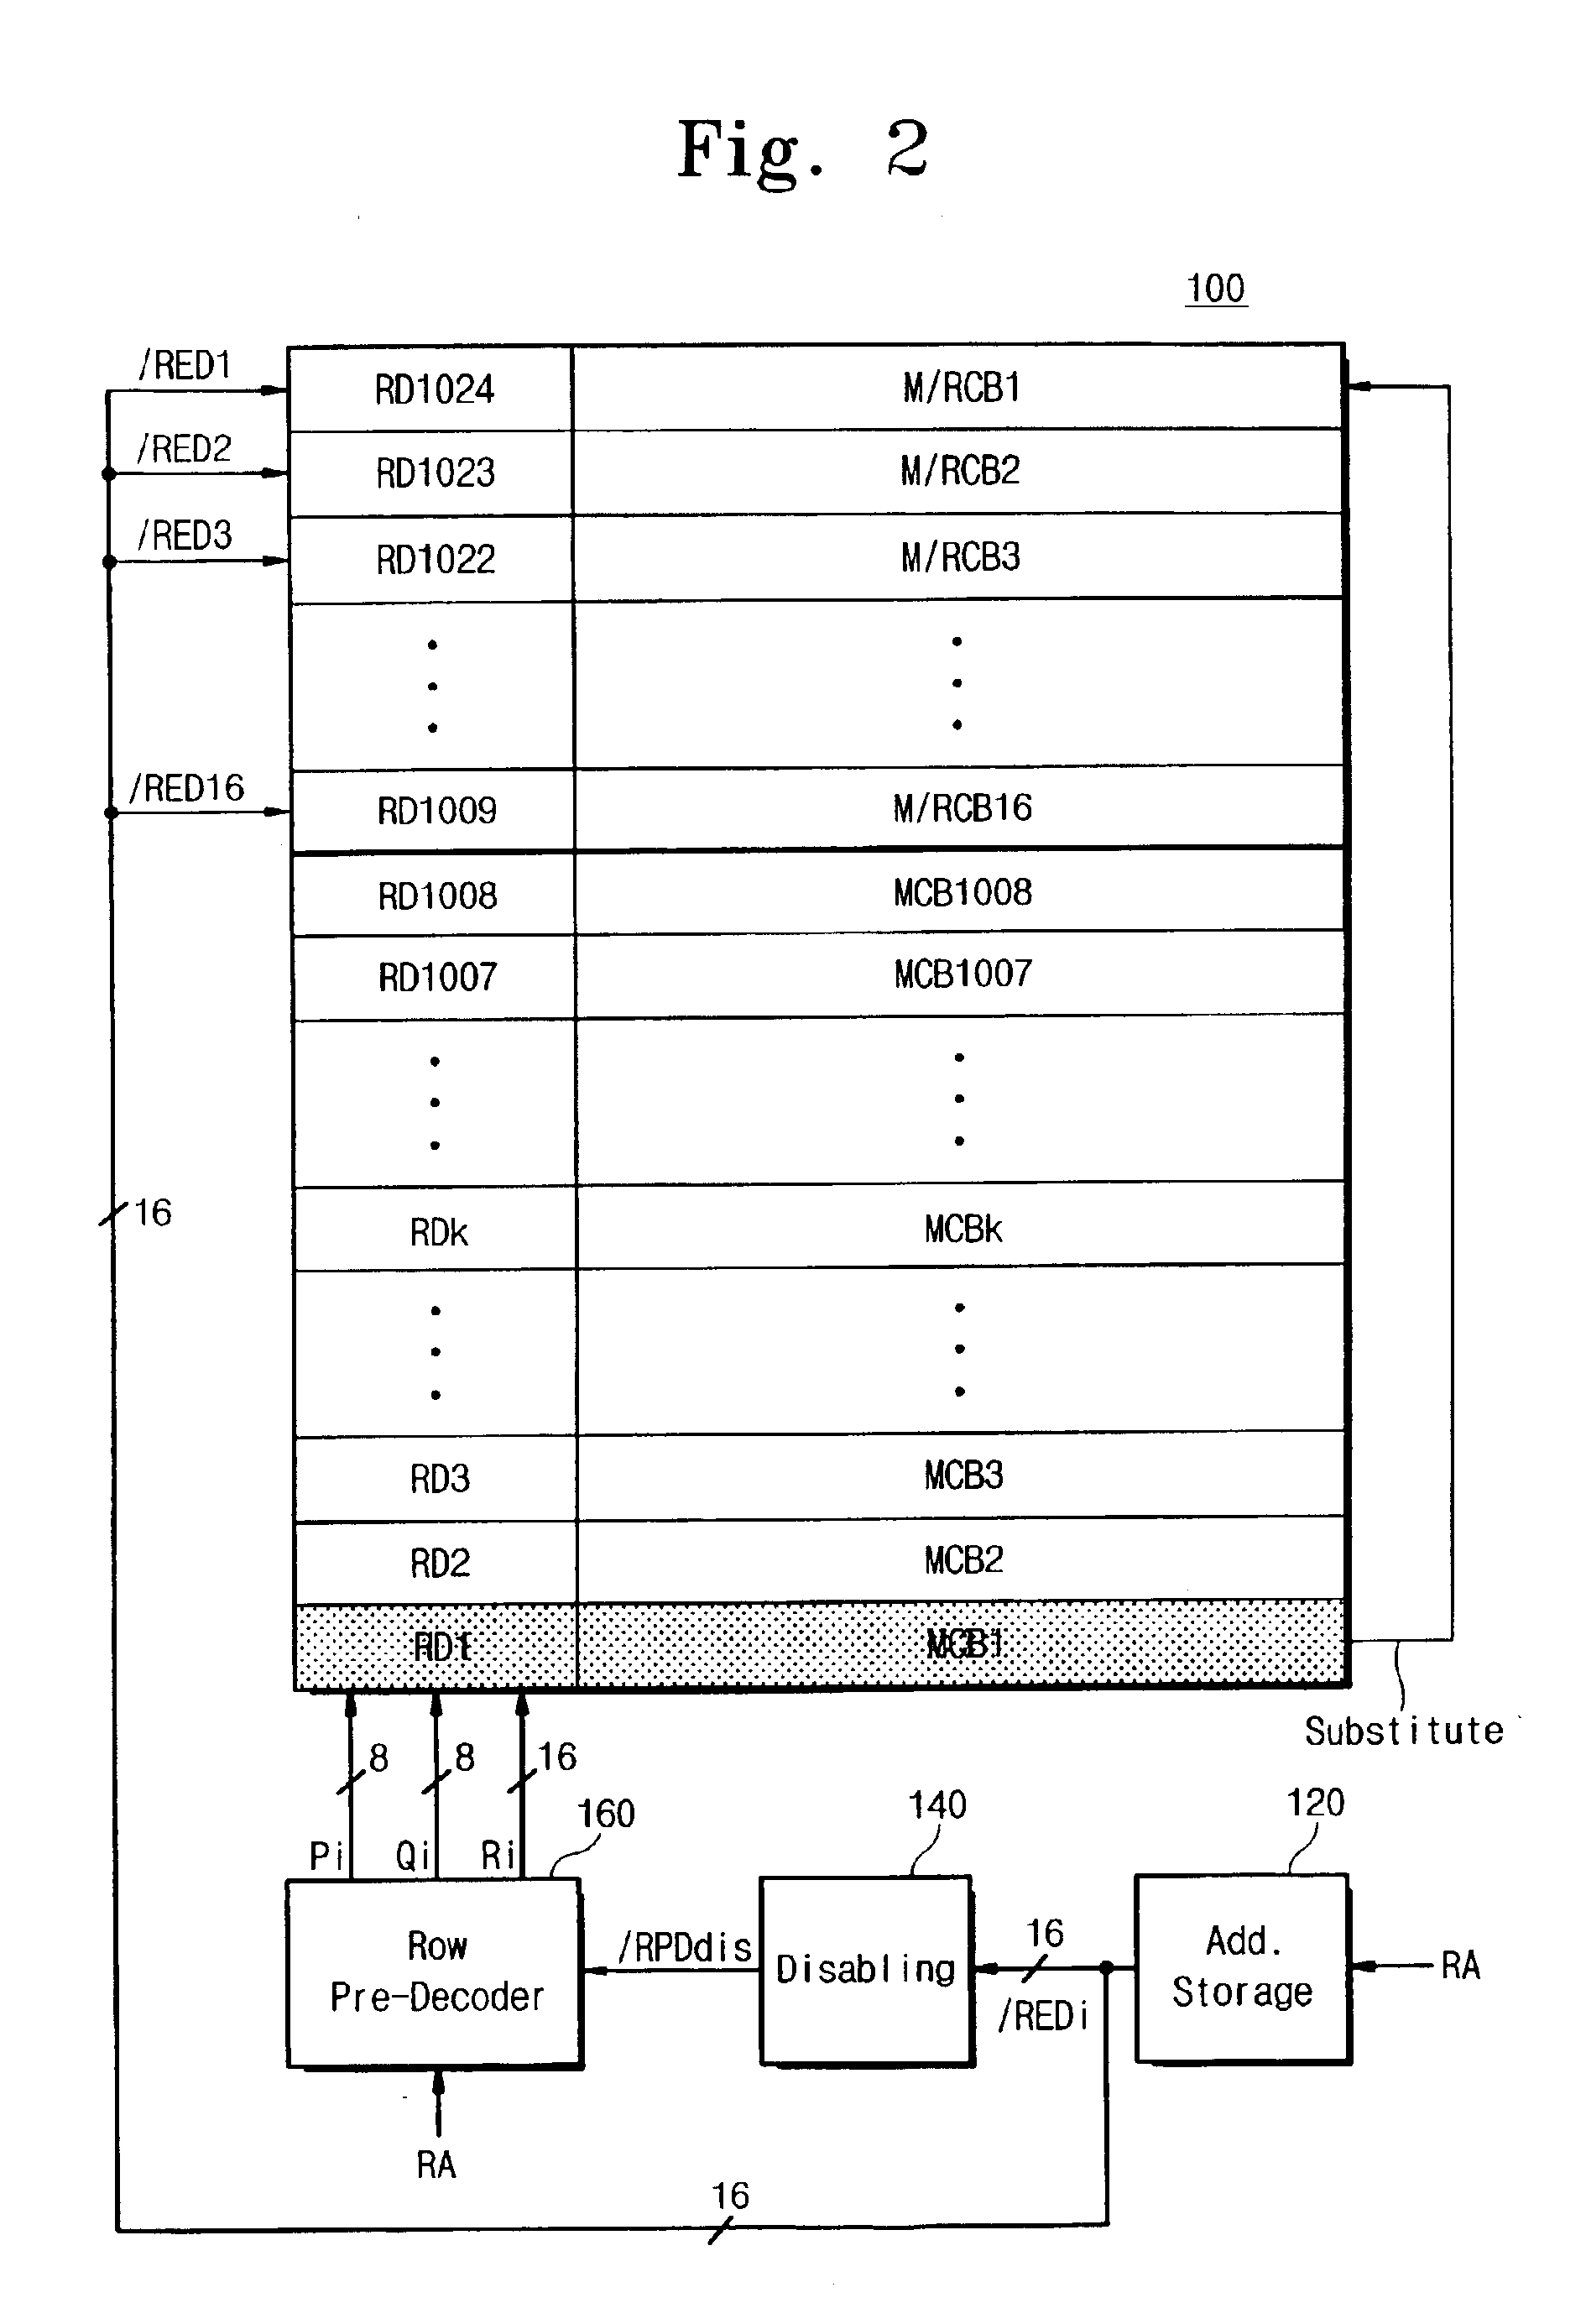 Semiconductor memory device with a flexible redundancy scheme